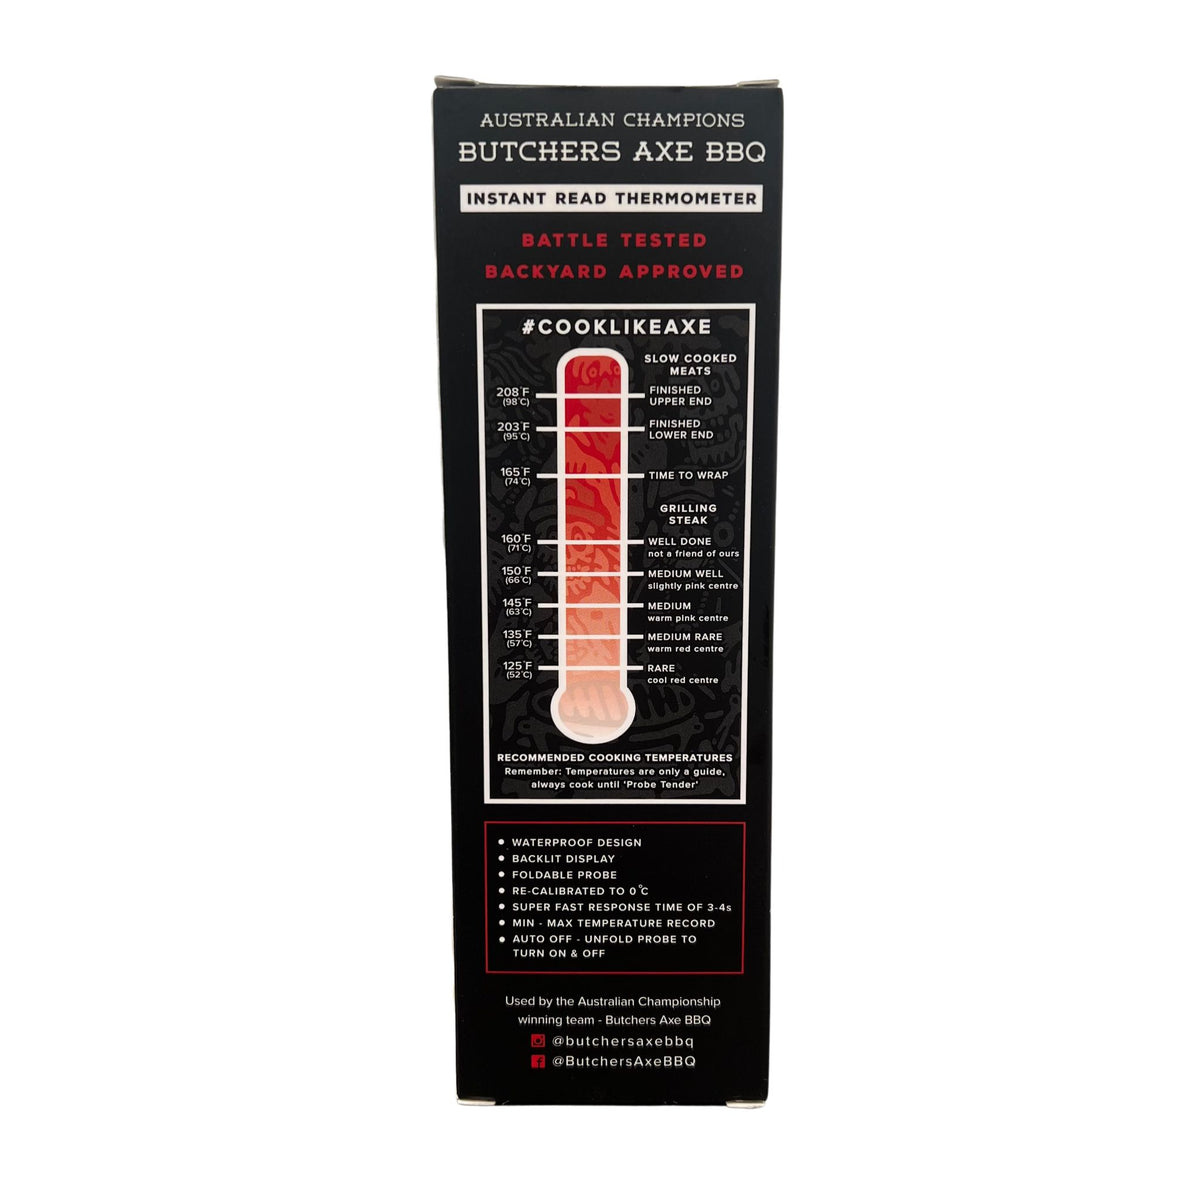 Butchers Axe BBQ Quick Read Thermometer